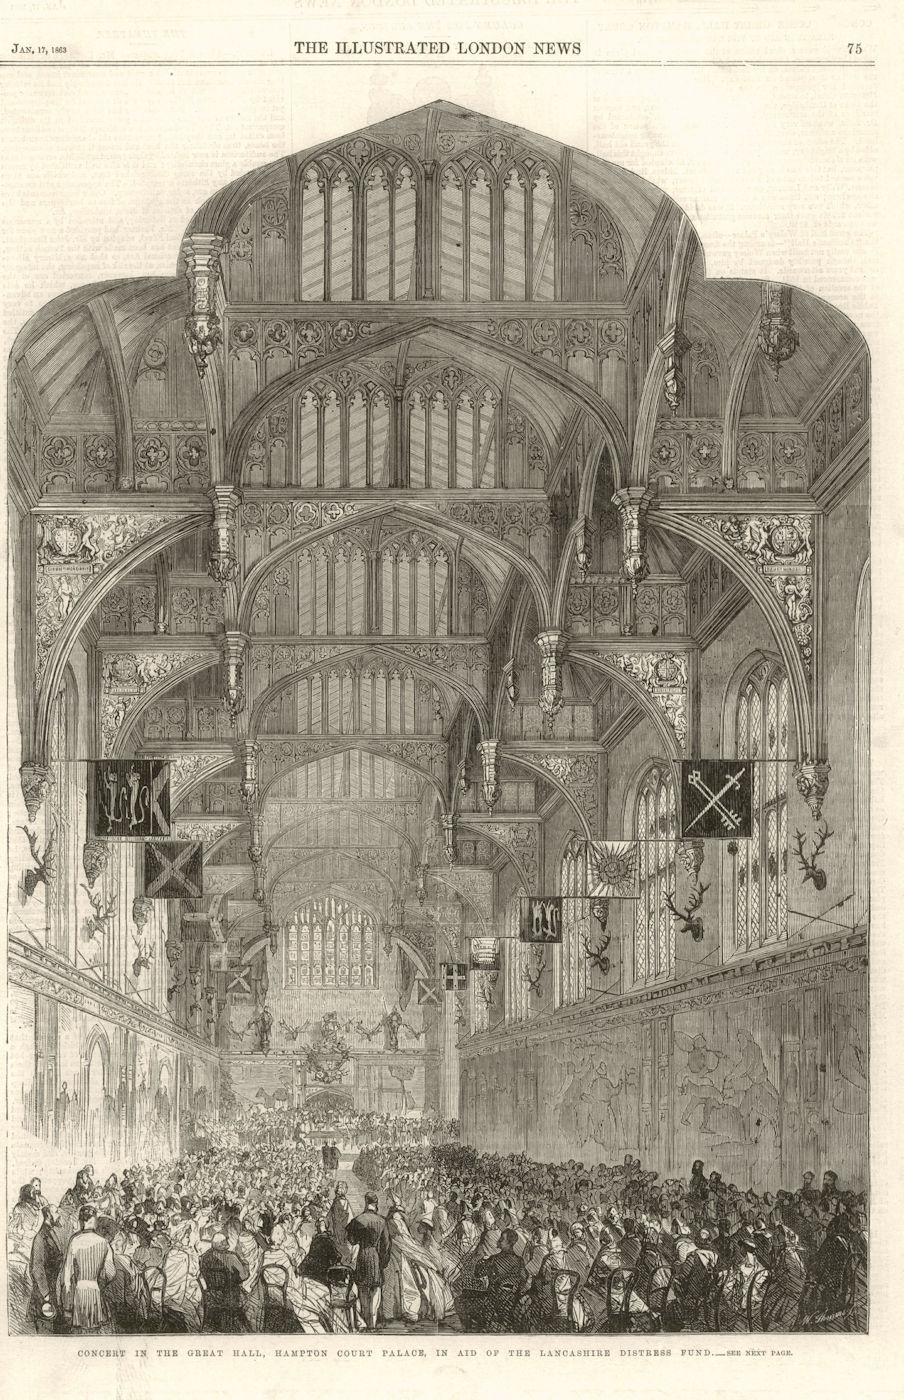 Associate Product Hampton Court Great Hall concert for the Lancashire cotton famine fund 1863